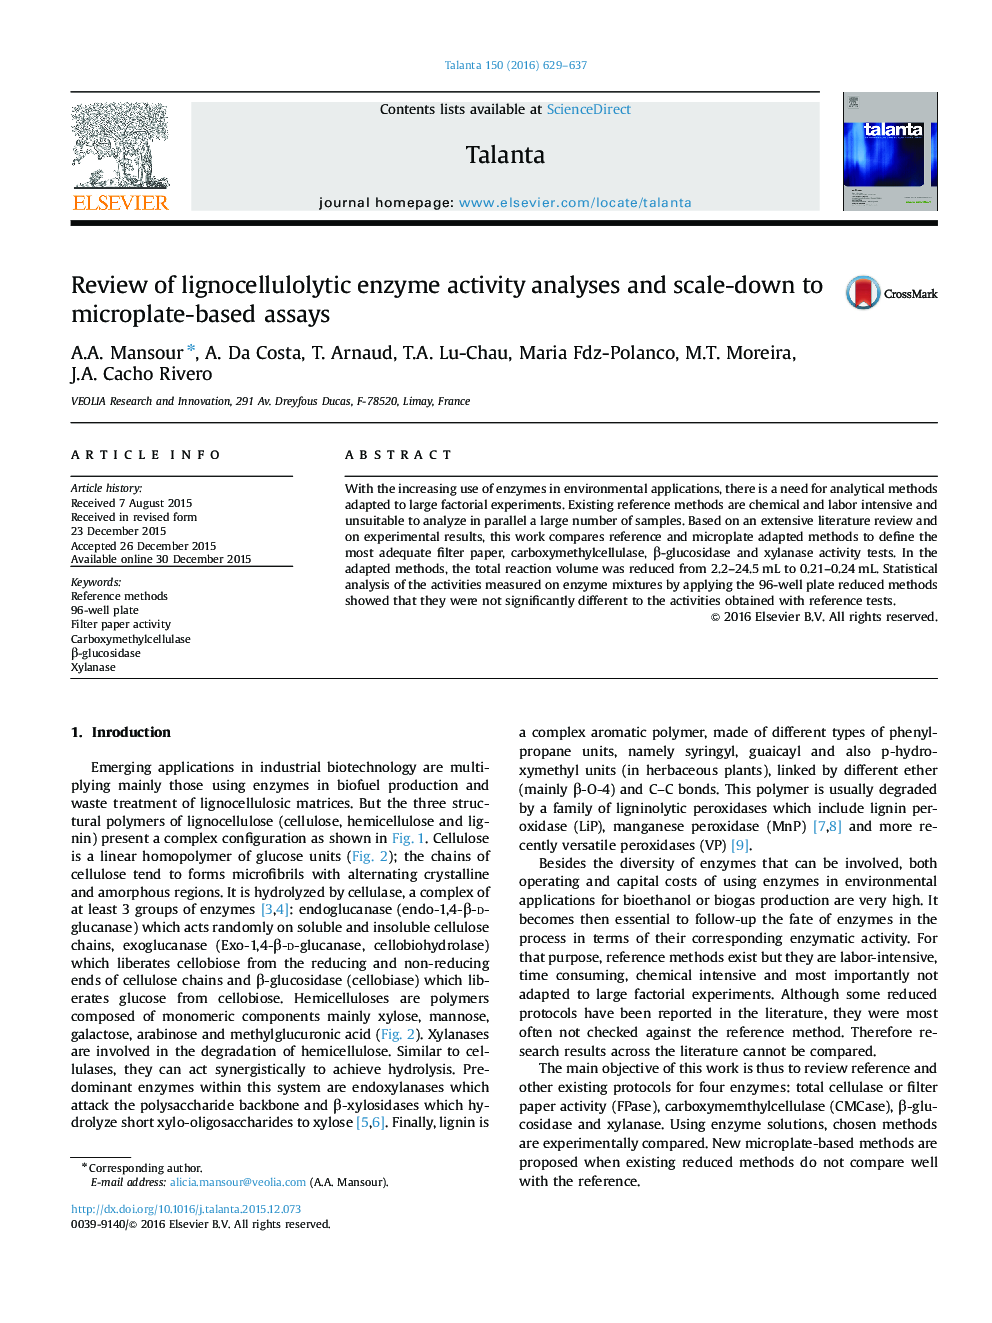 Review of lignocellulolytic enzyme activity analyses and scale-down to microplate-based assays